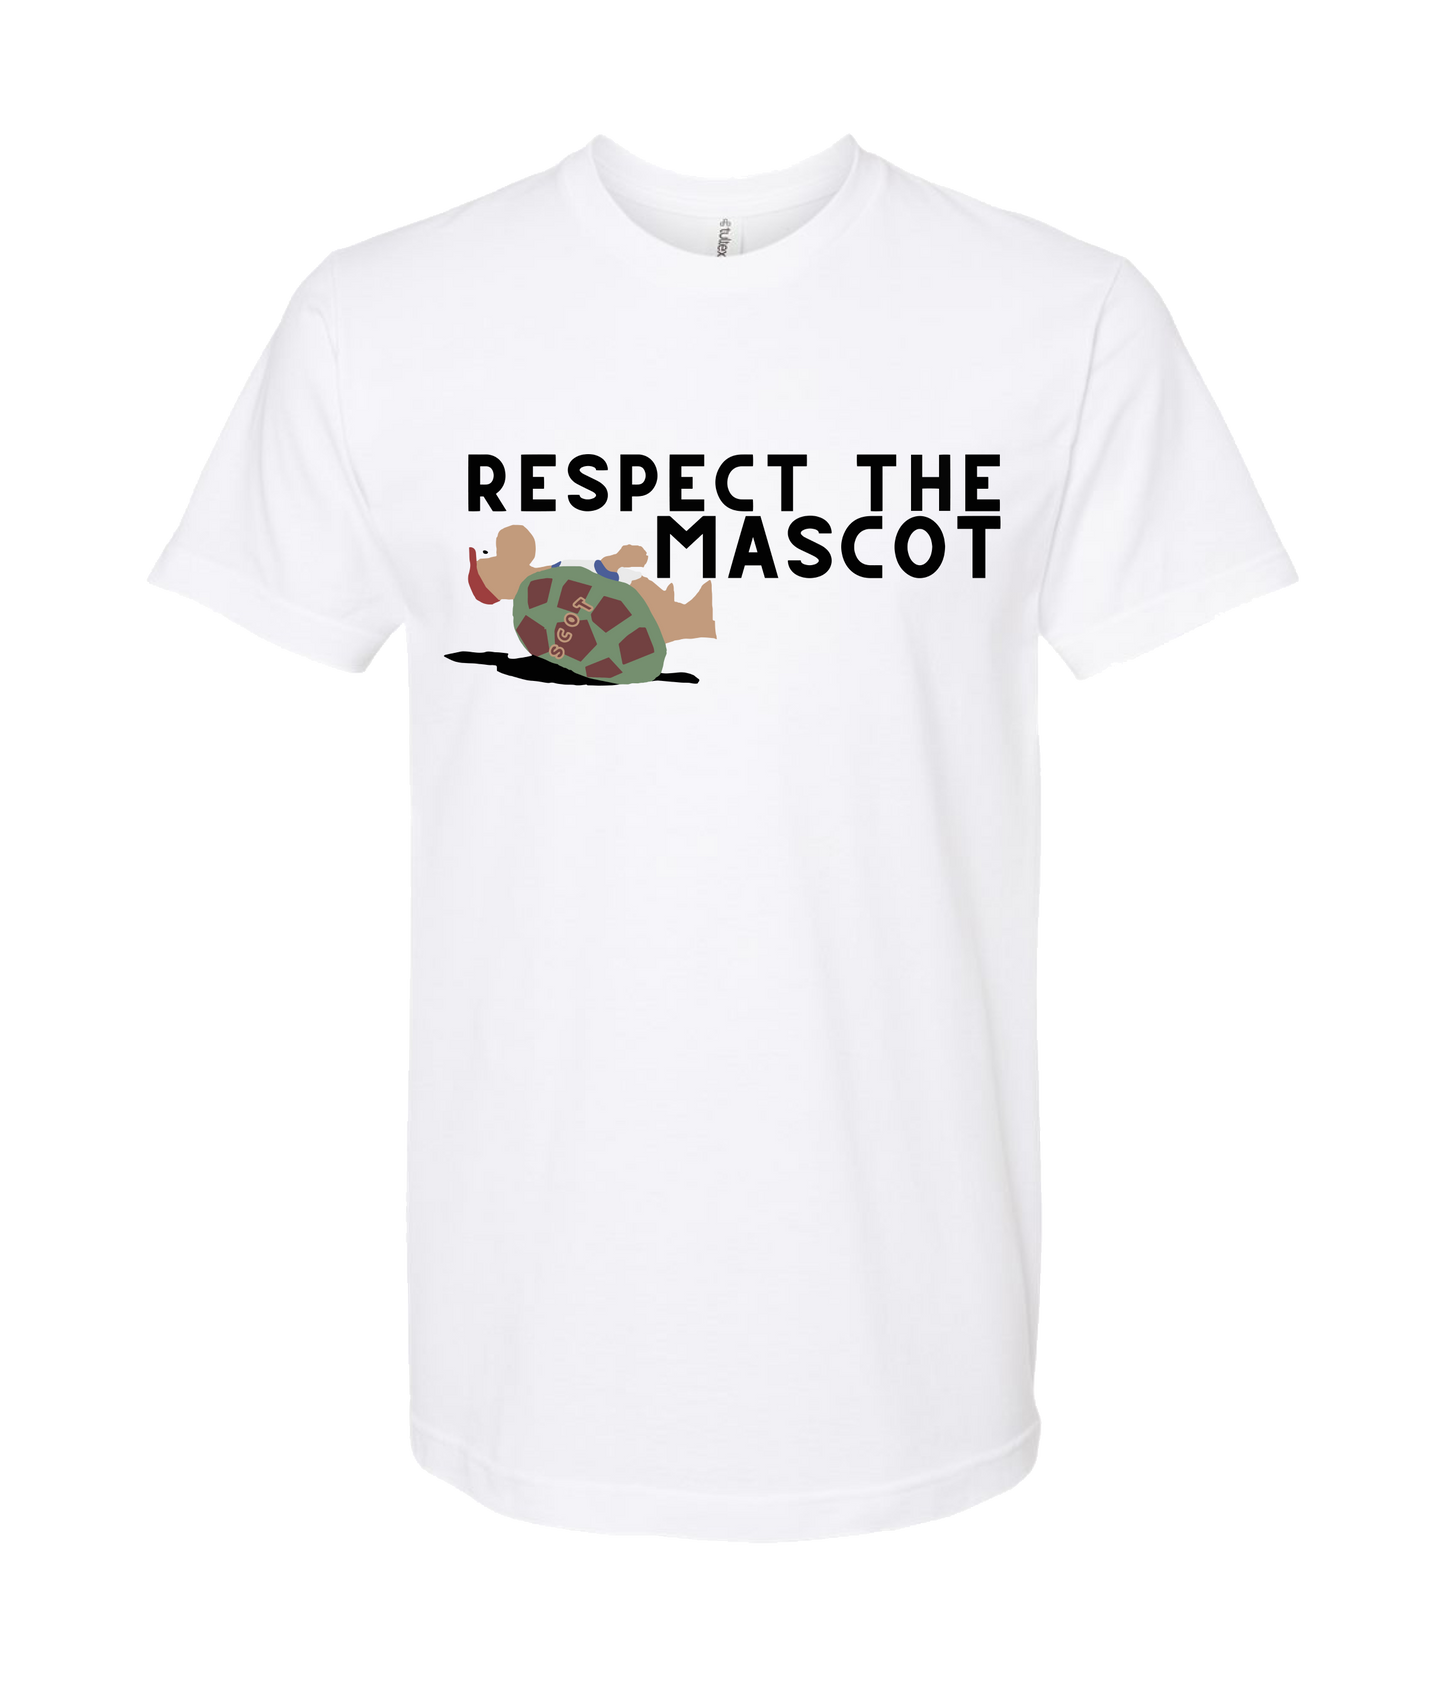 The Philly Captain's Merch is Fire - RESPECT THE MASCOT - White T-Shirt